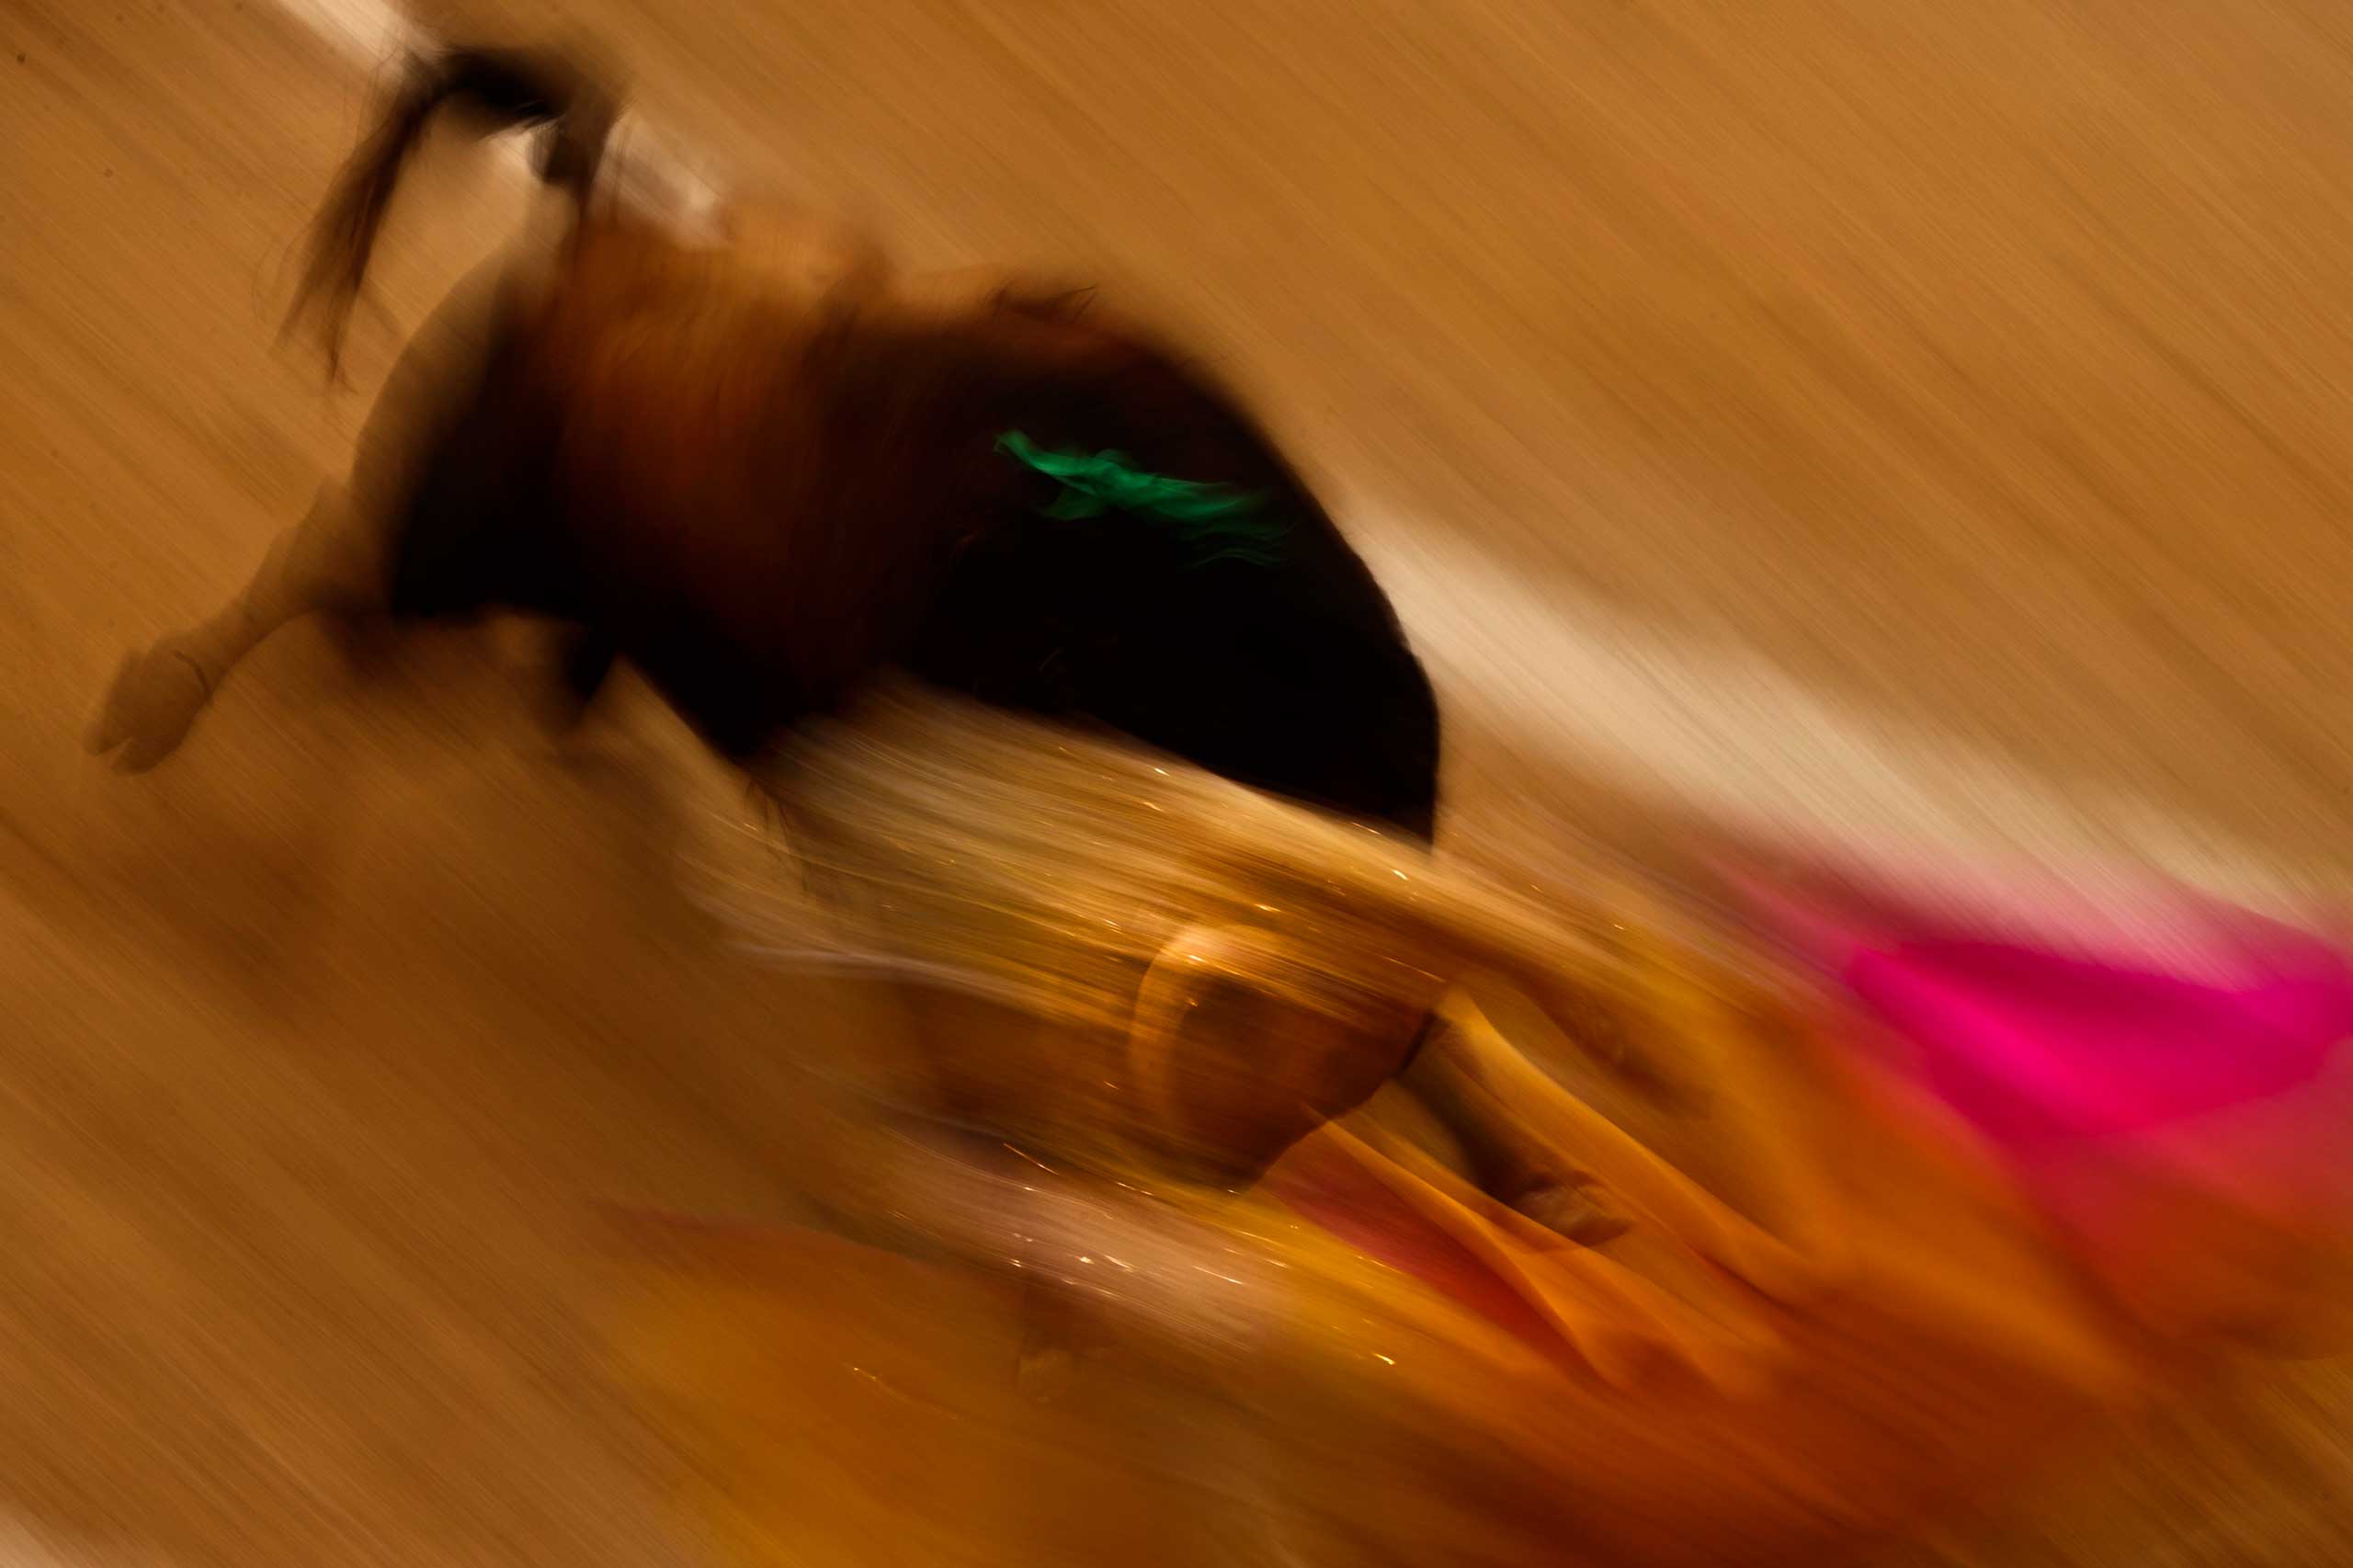 Spanish bullfighter Uceda Leal performs with a Fuente Ymbro's ranch fighting bull during a bullfight of the San Isidro fair in Madrid, Spain, May 27, 2014.